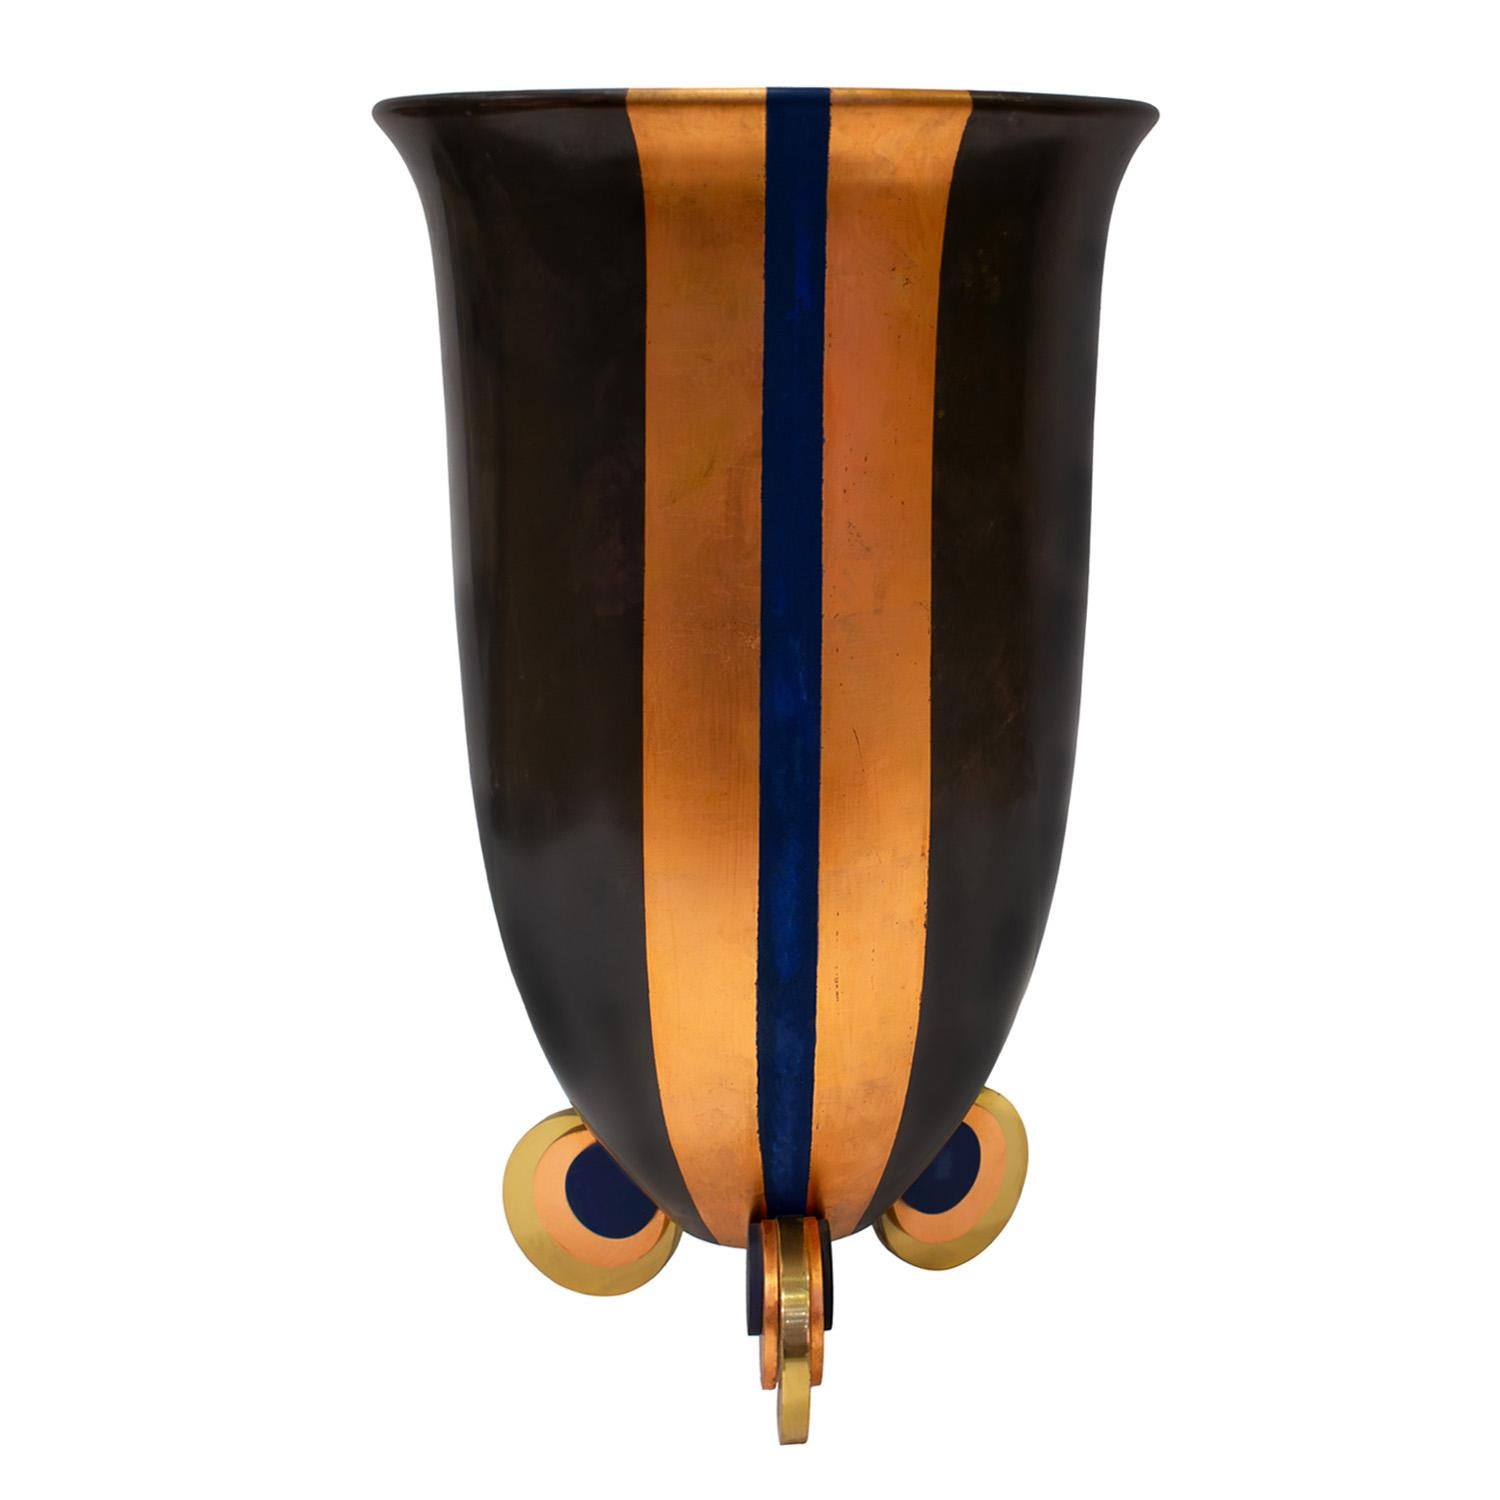 Large and exceptional Art Deco urn in bronze with applied copper leaf and blue enamel with disc feet by Karl Springer, American 1980's. The scale and opulent colors make this urn a stand out.  It’s absolutely magnificent.

Reference:
LOBEL MODERN